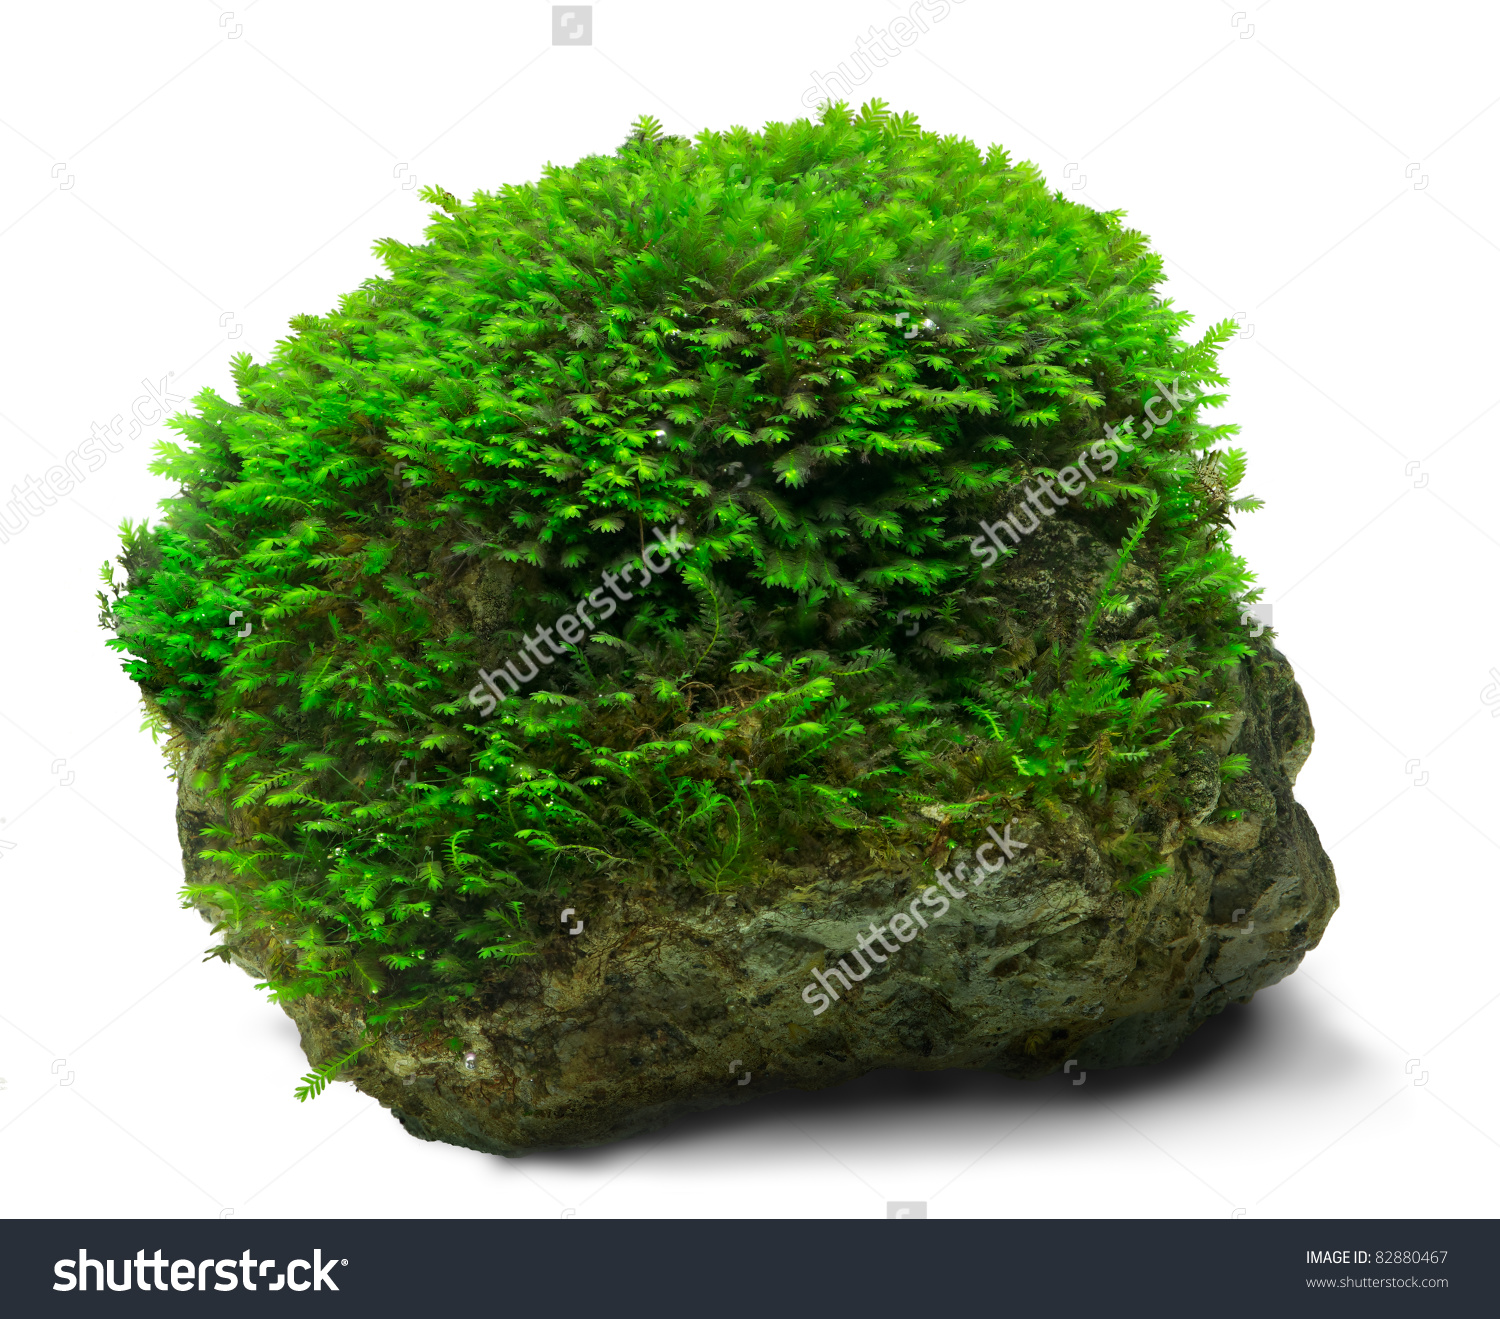 Moss clipart #12, Download drawings